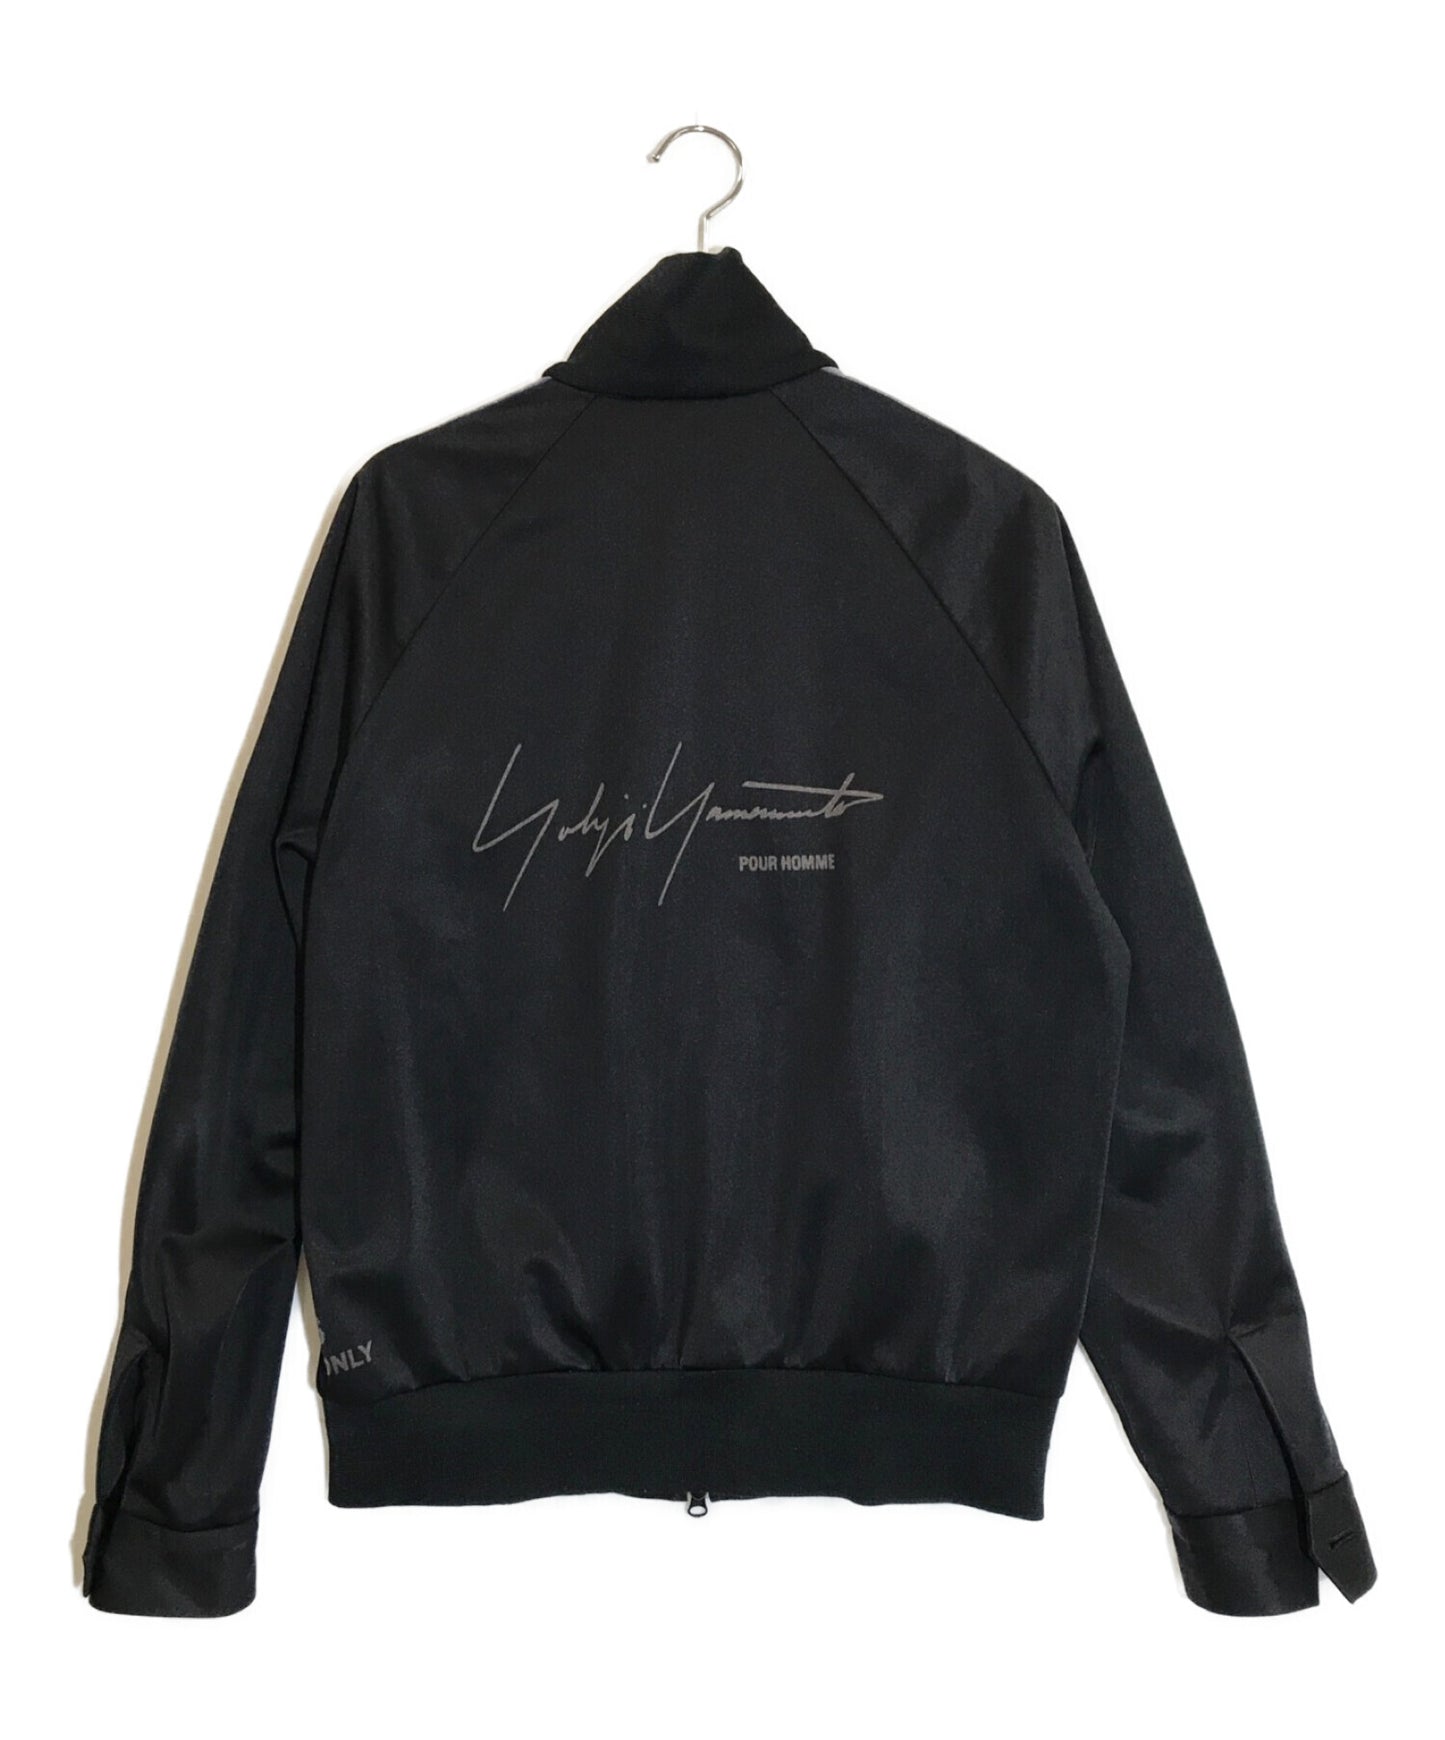 Yohji Yamamoto POUR HOMME Staff Track Jacket Limited to 66 pieces